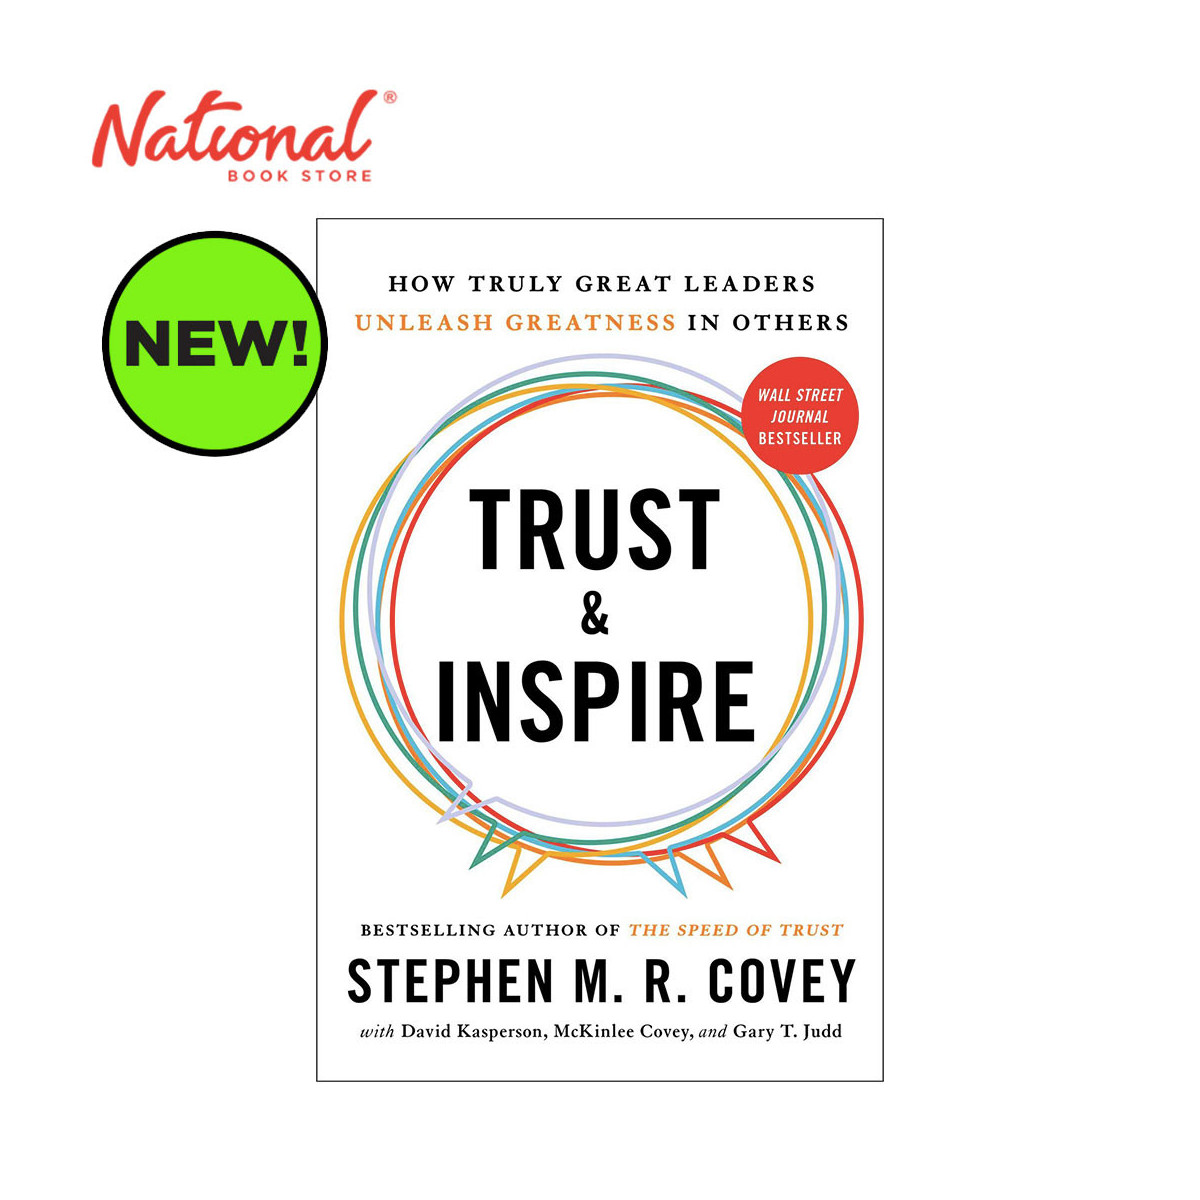 Trust and Inspire by Stephen M.R. Covey - Trade Paperback - Management & Leadership